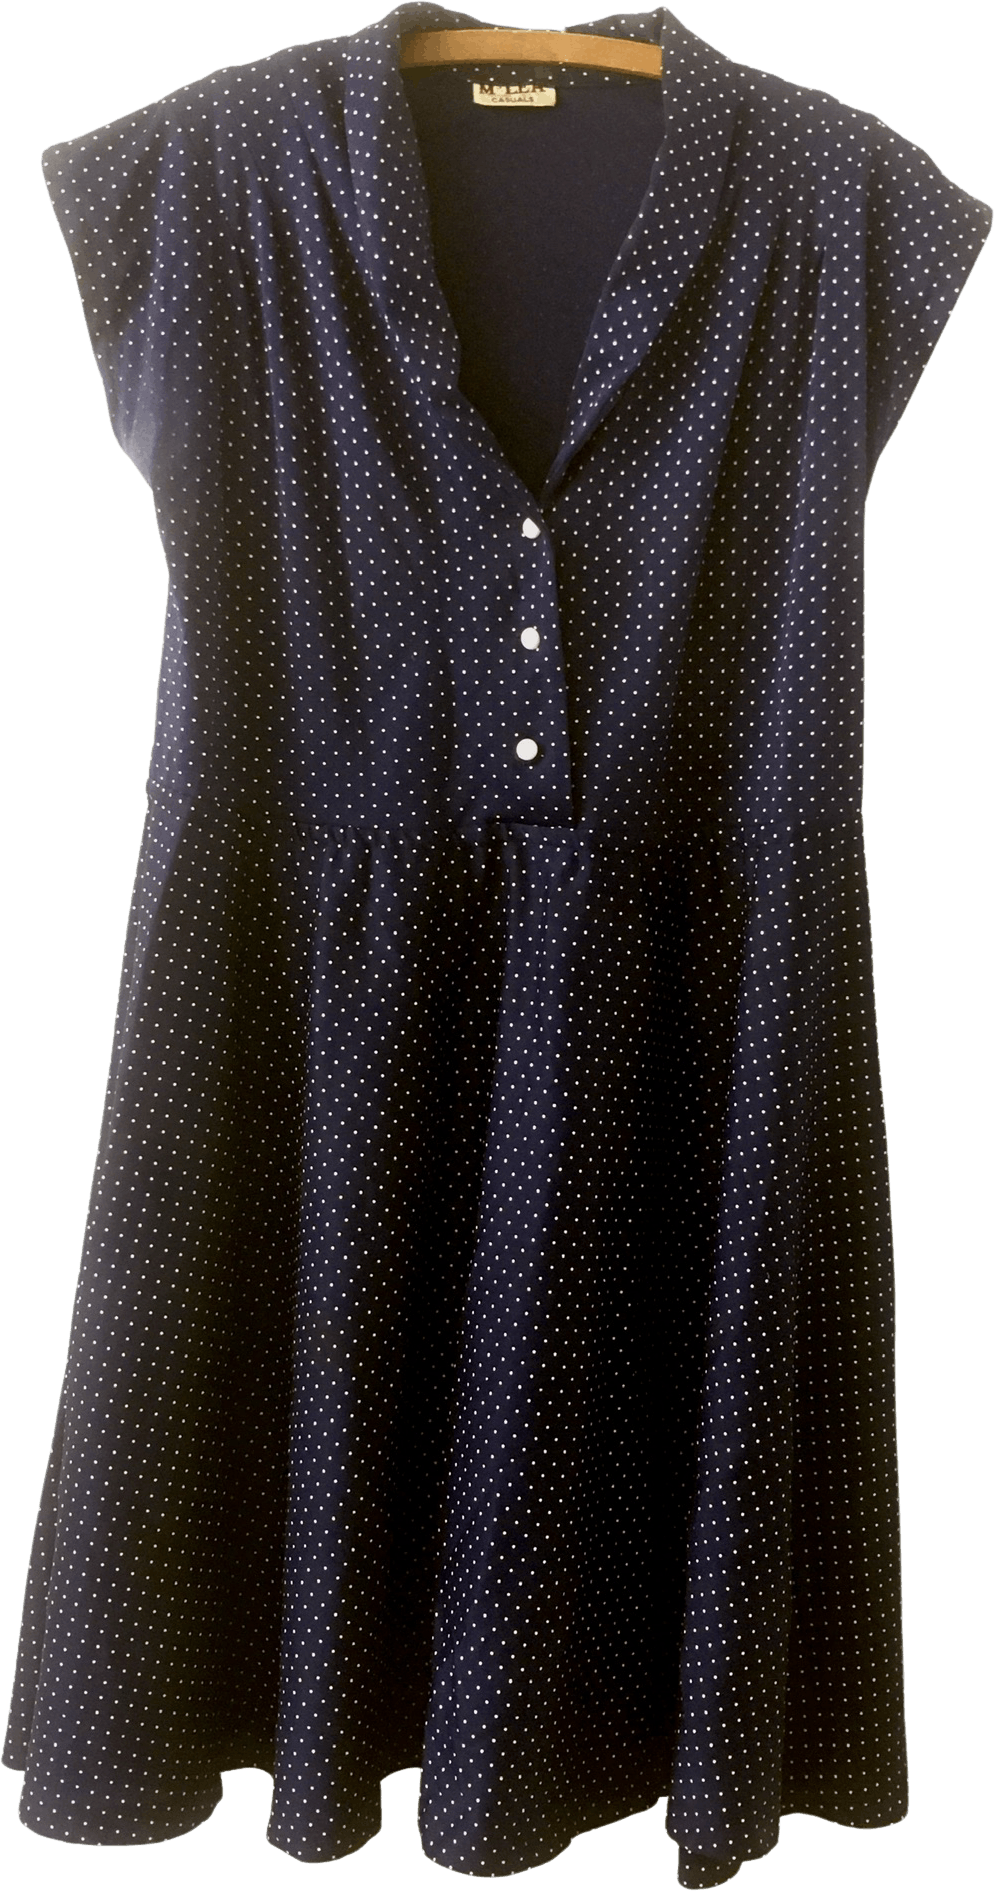 Vintage Fit and Flare Navy and White Polka Dot Perfection | Shop THRILLING